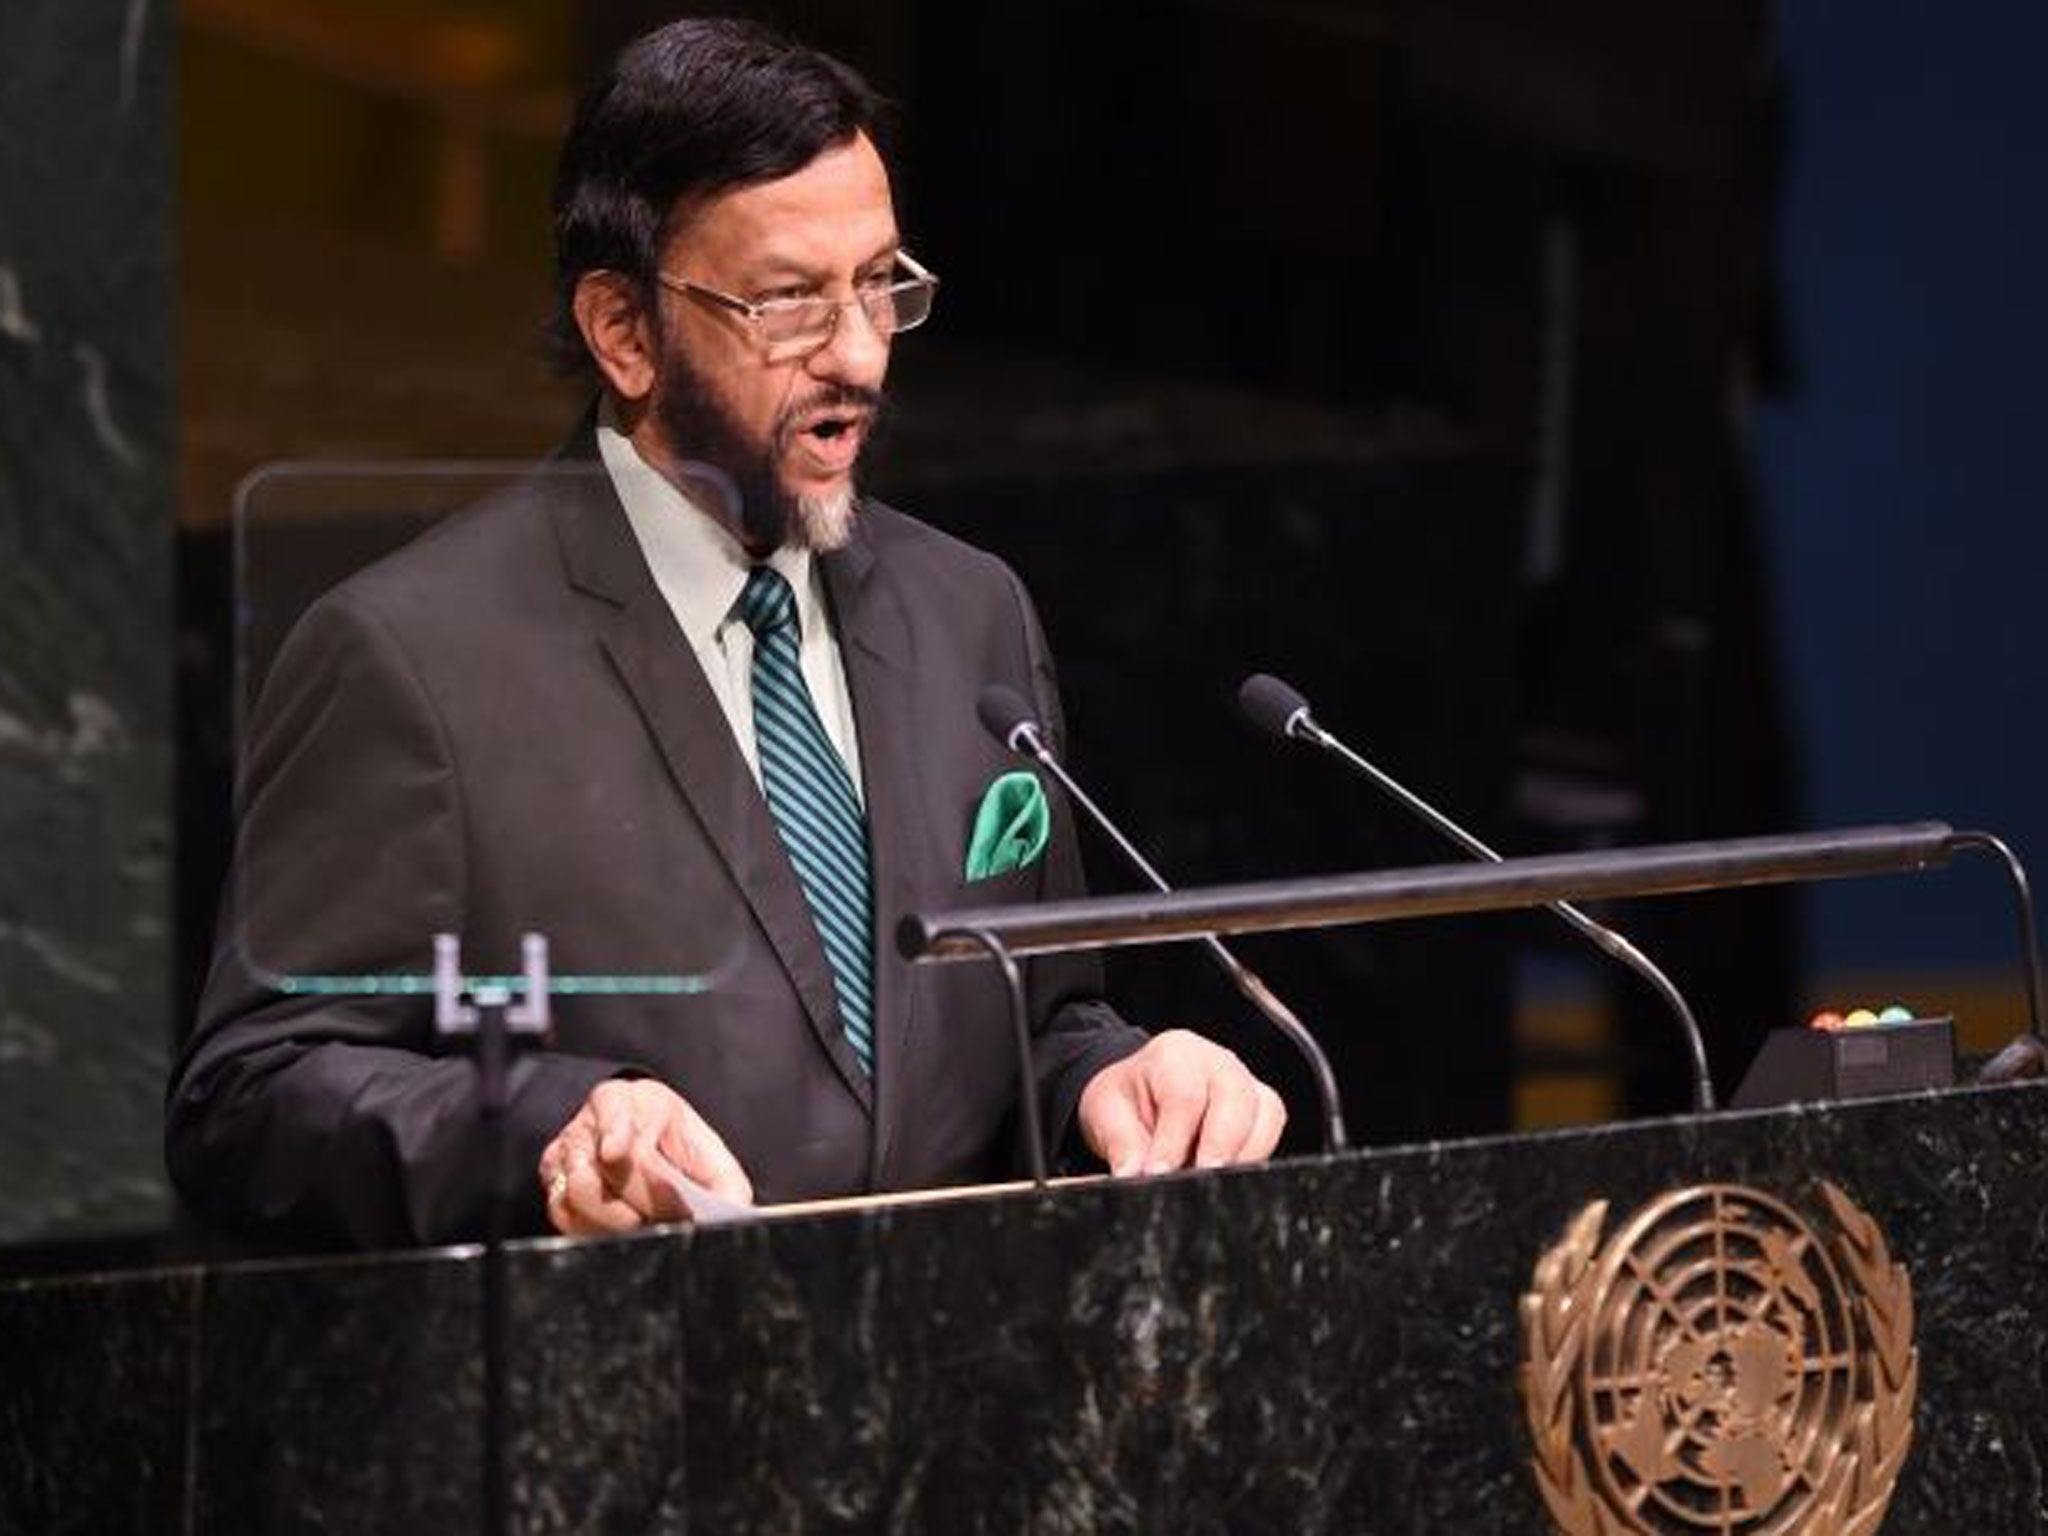 Rajendra Pachauri speaking at the opening of the United Nations Climate Summit 2014 at the United Nations in New York.